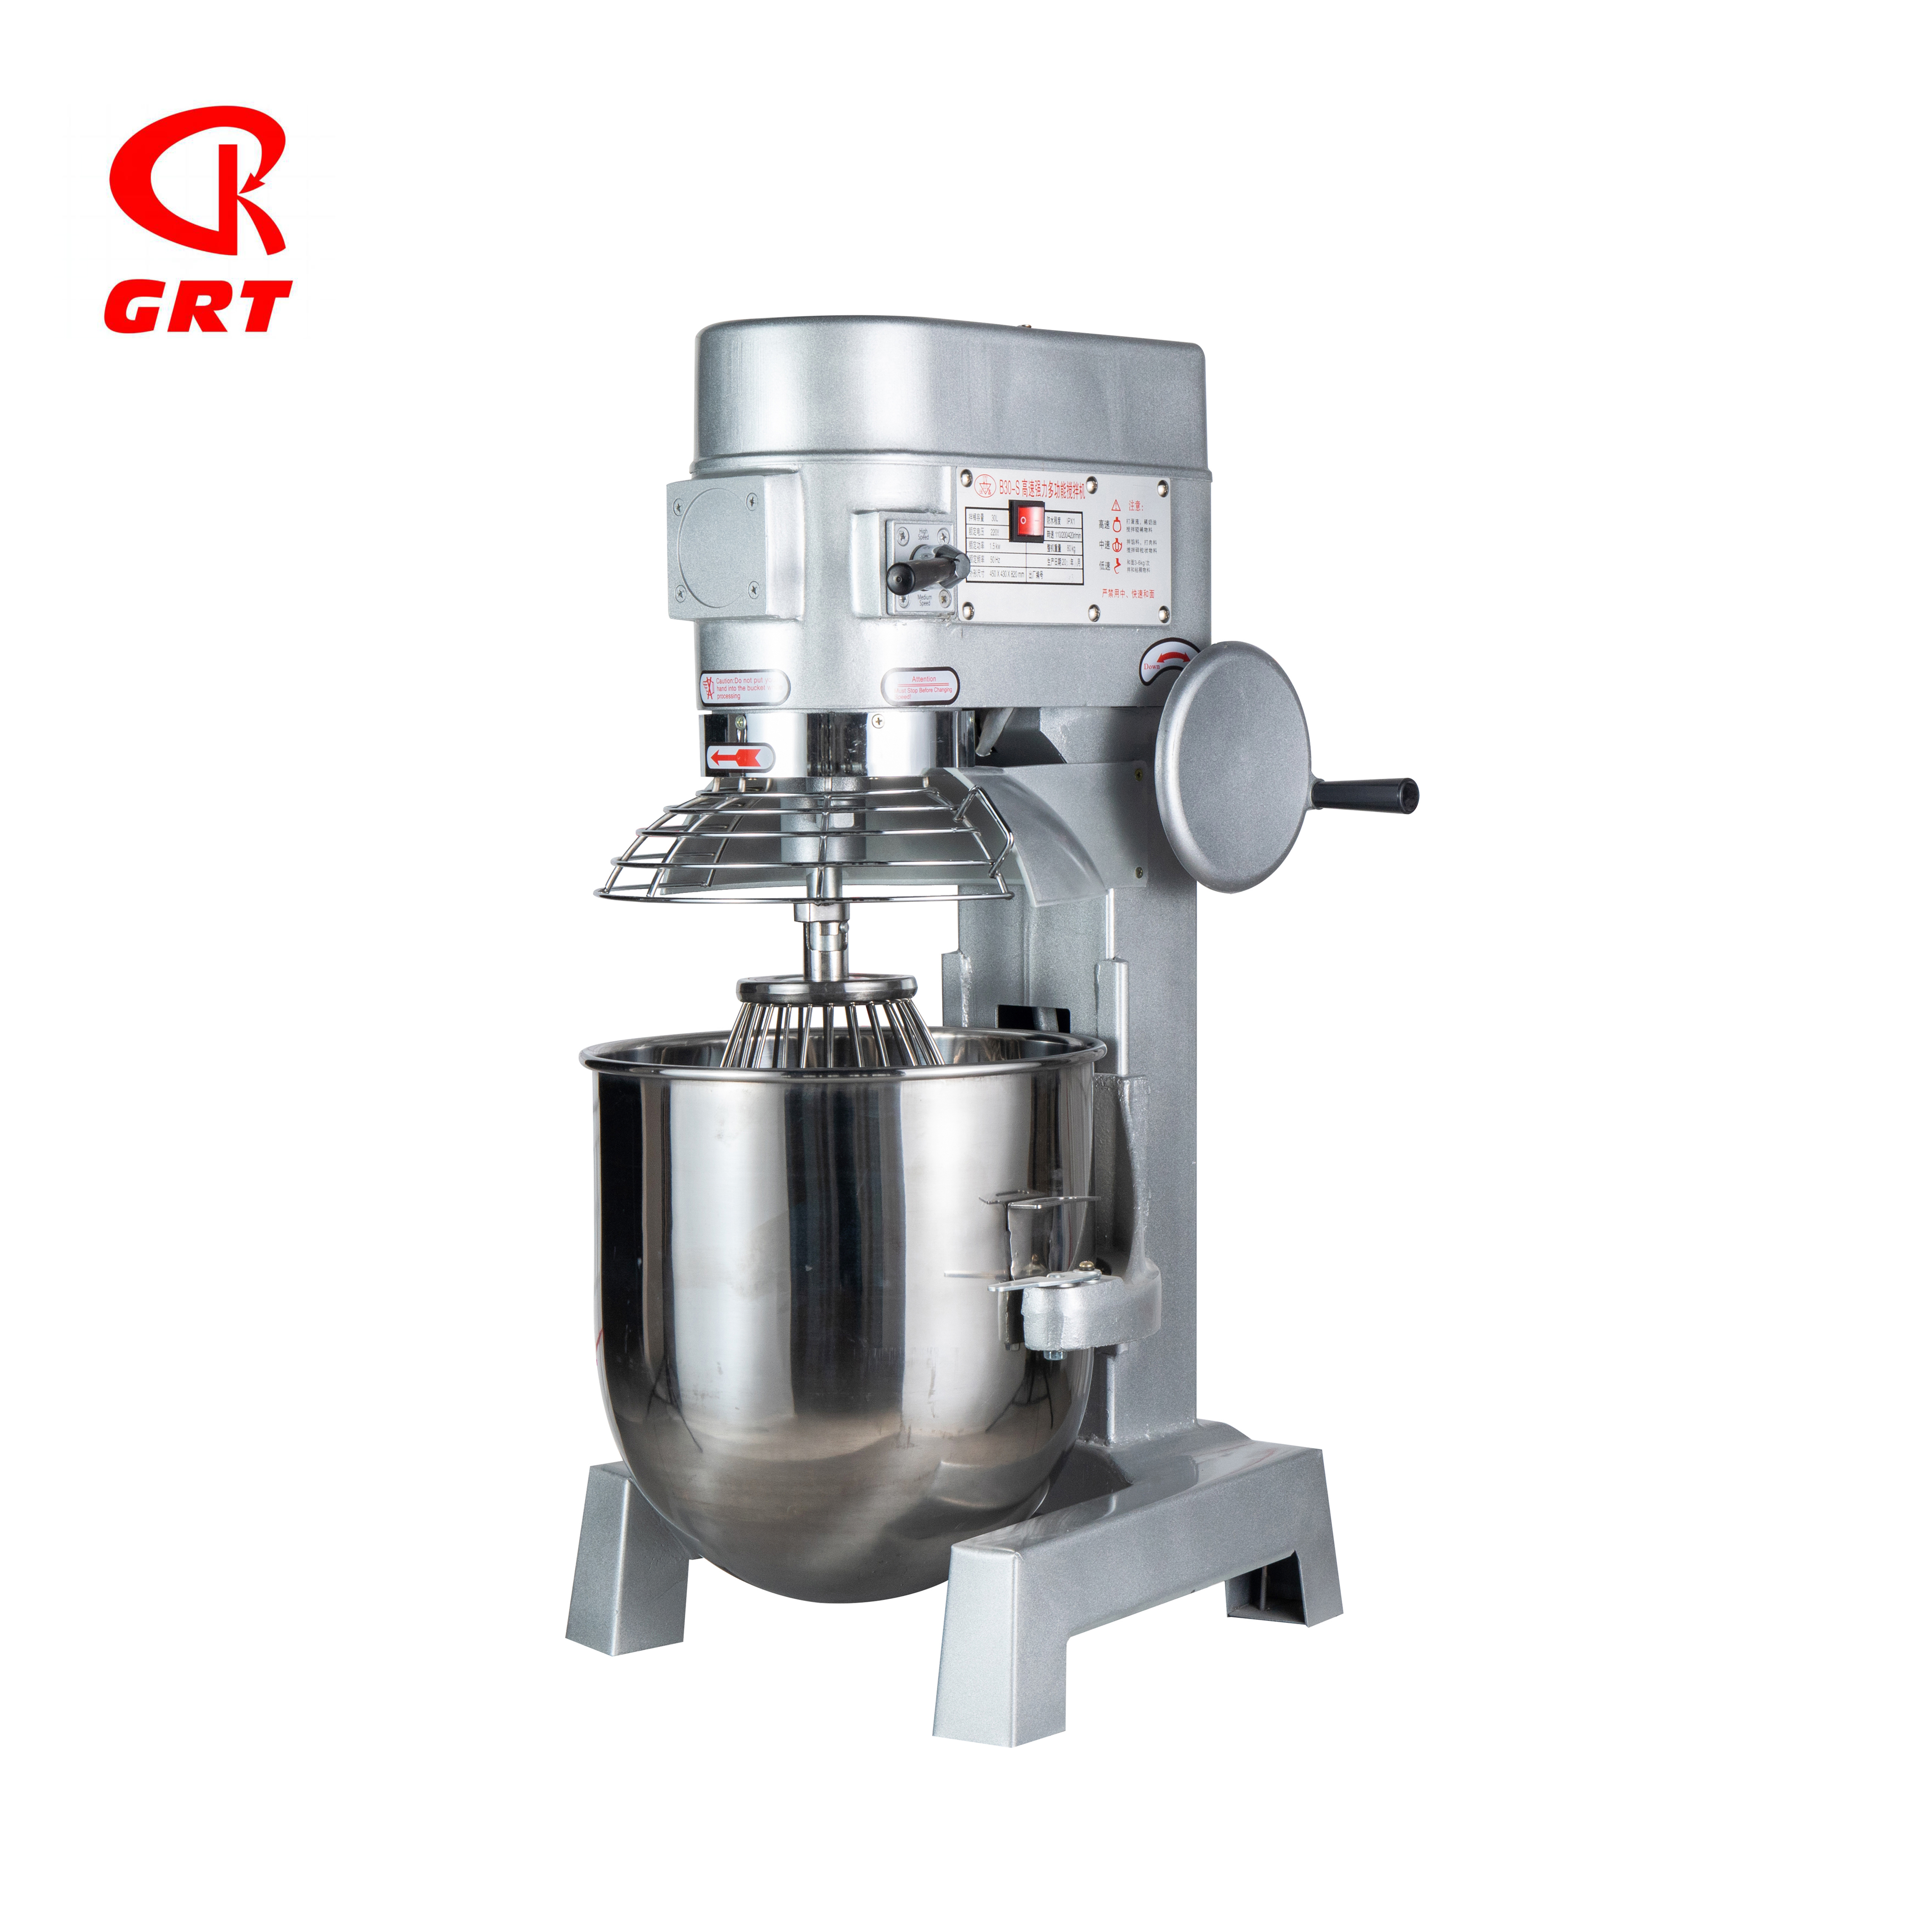 GRT-B30 Commercial Planetary Mixer/ Dough Kneading/Cream Mixing Beating Machine